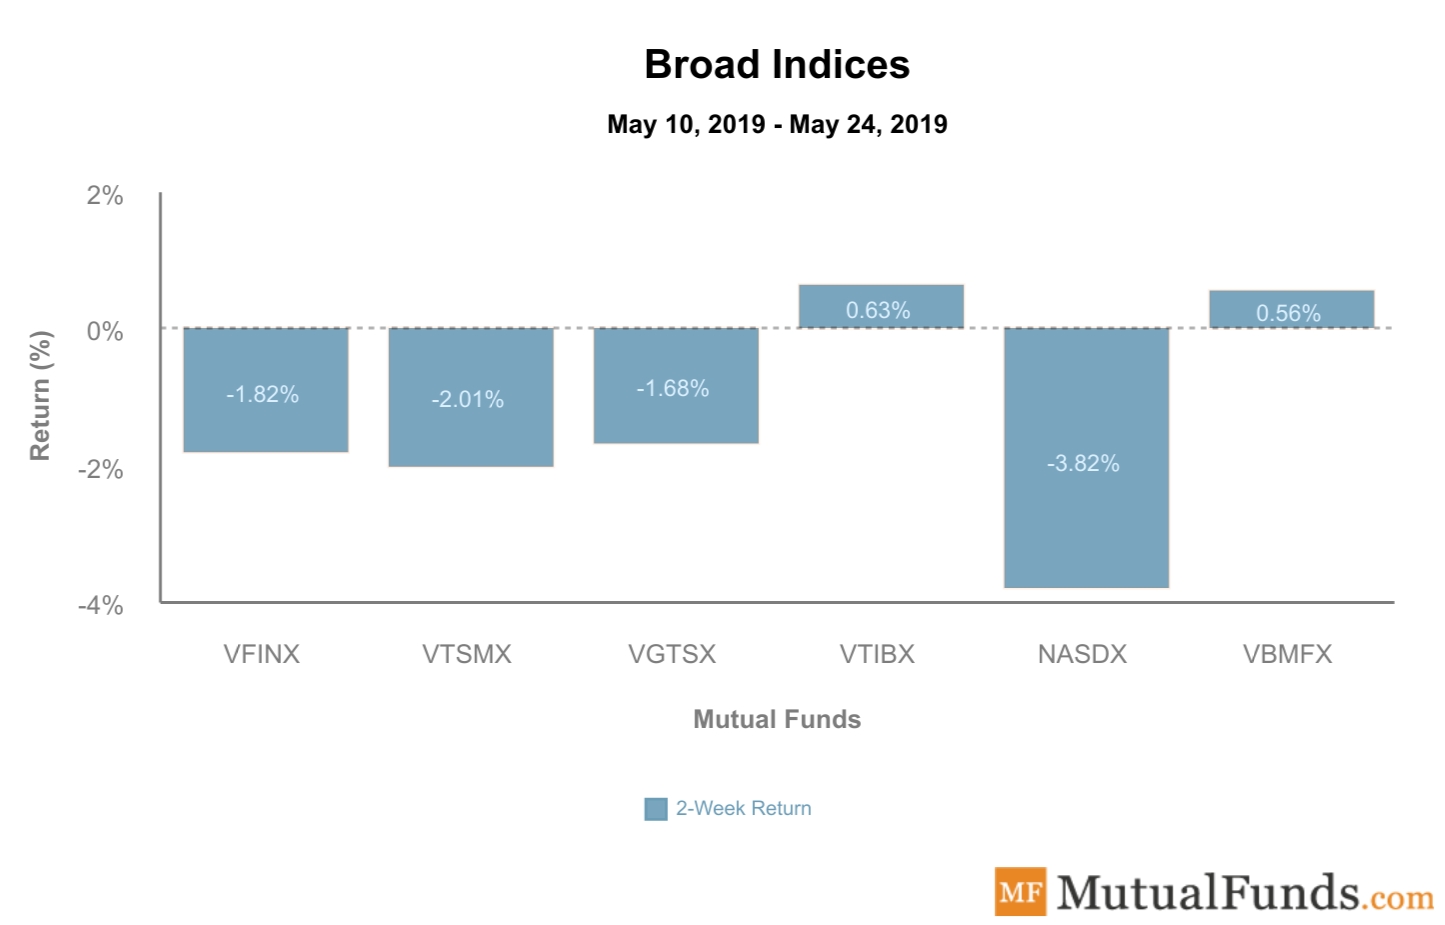 Broad Indices performance - May 28, 2019